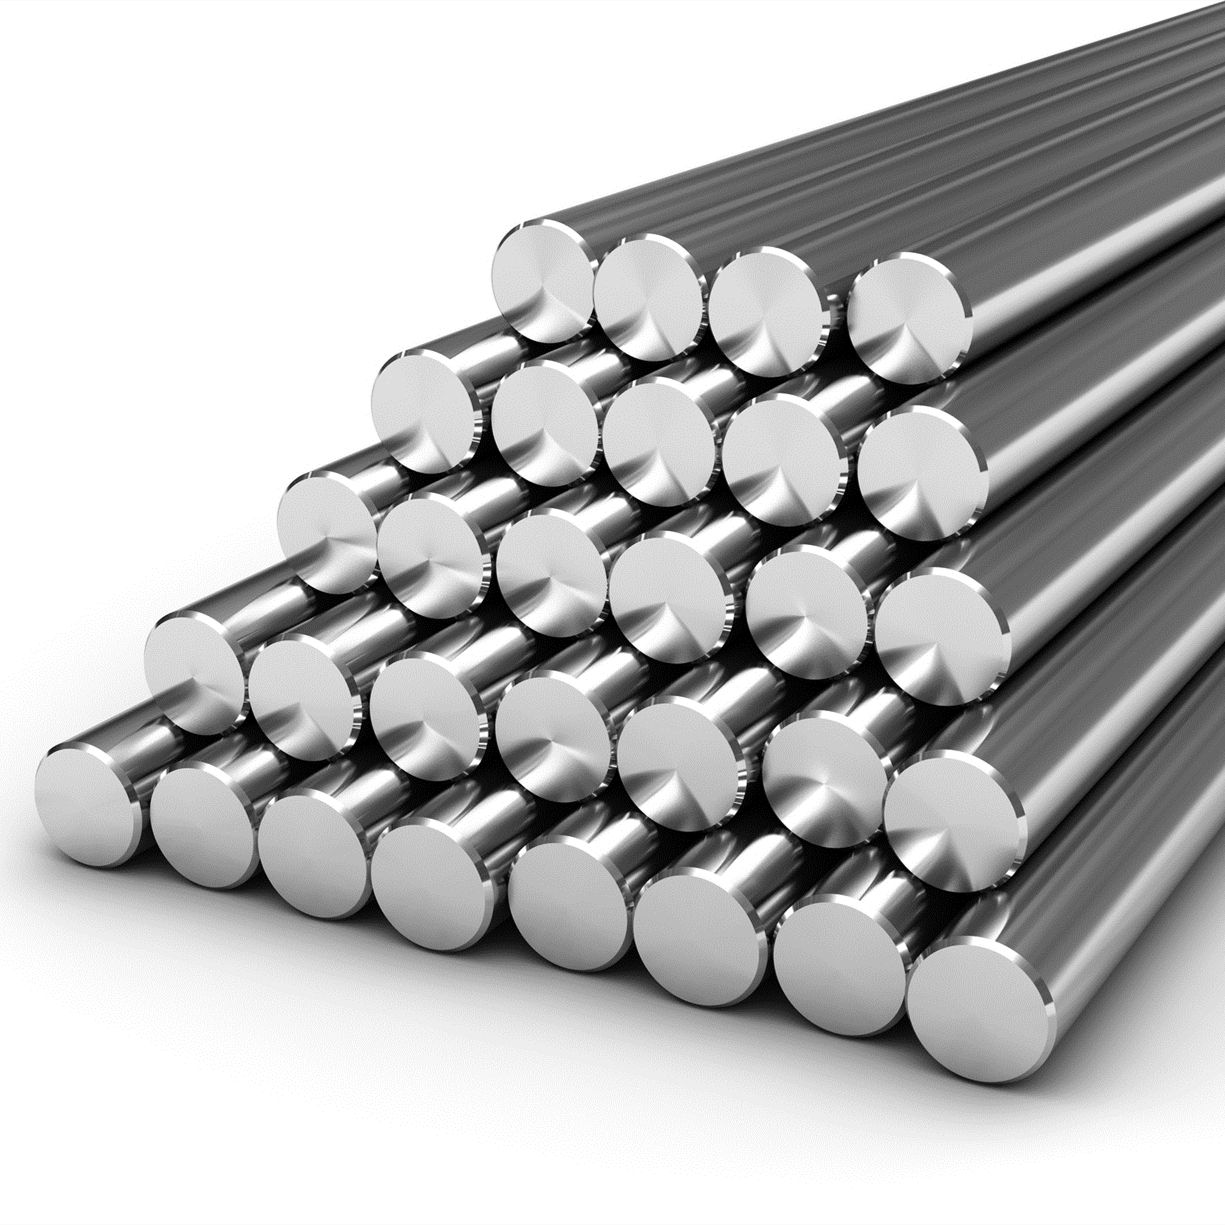 A276 410 Stainless Steel Round Bar Building Material  420  Stainless Steel Round Rod Bar